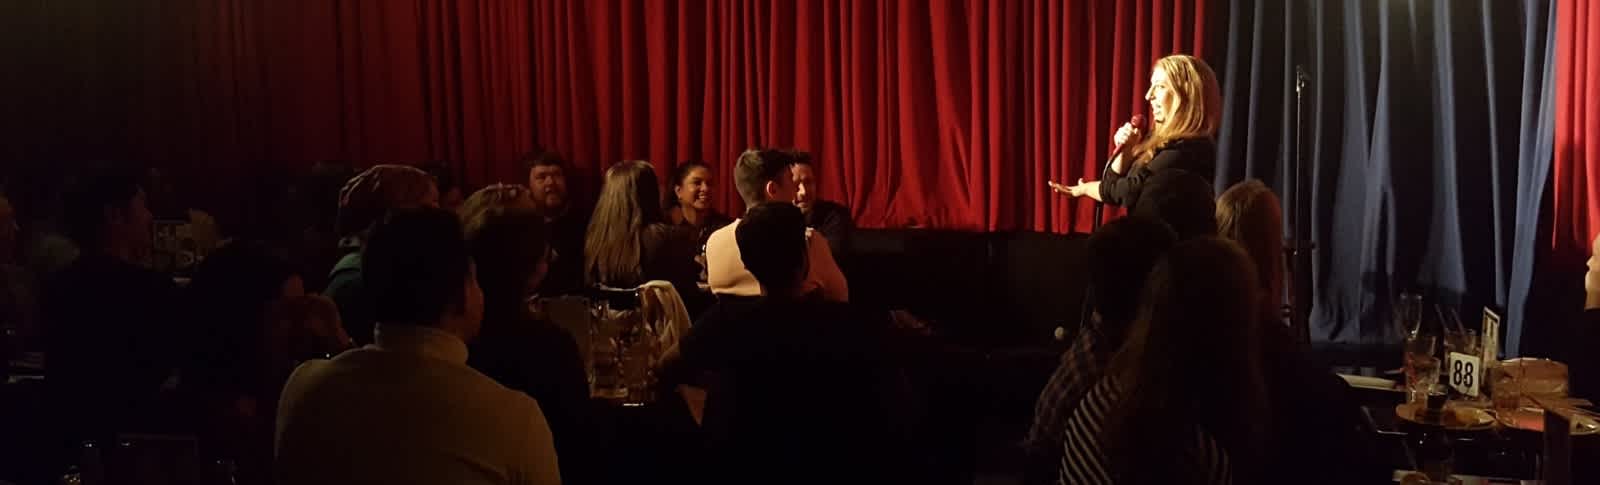 Pamela on stage doing standup in front of a red velvet curtain in a dimly lit packed room